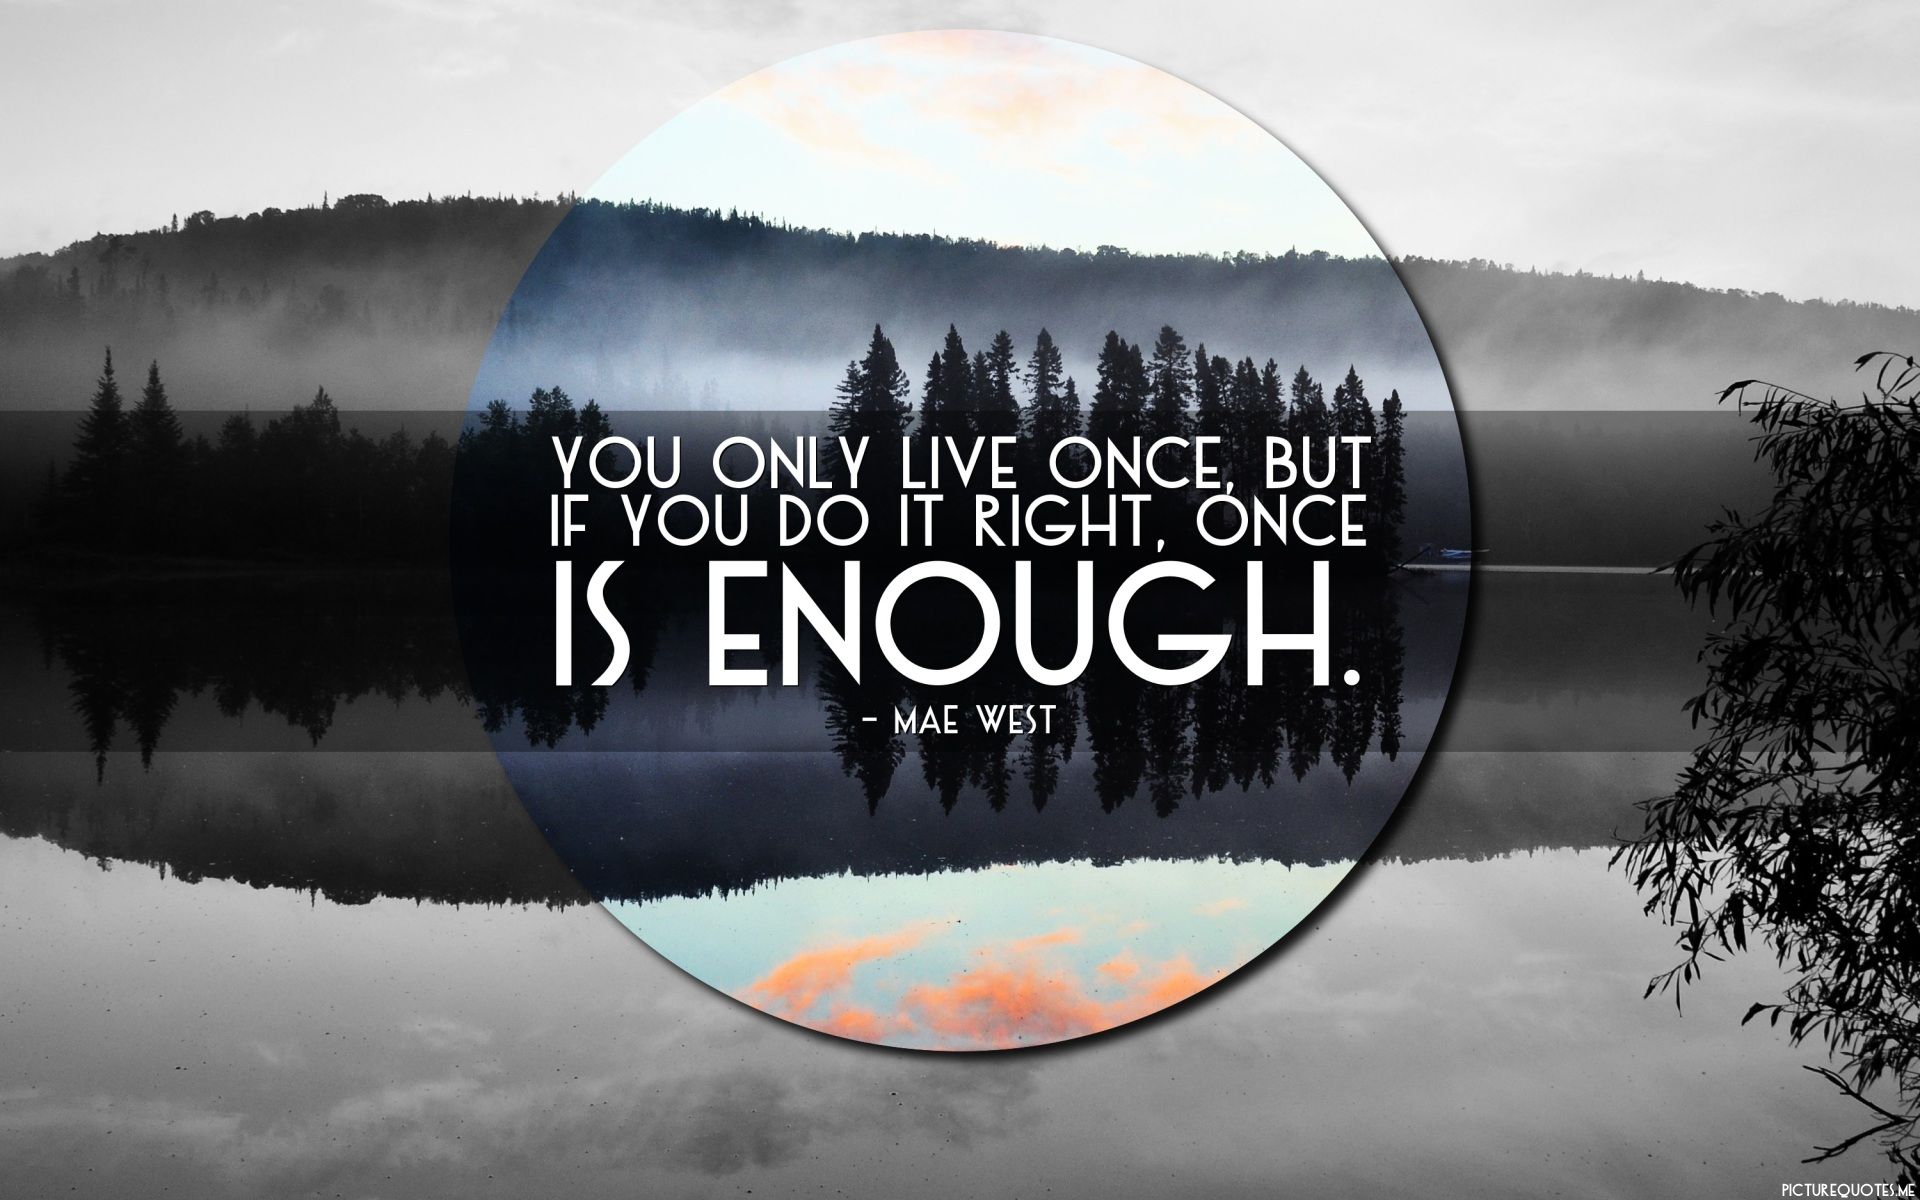 You only live one, but if you do it right, once is enough